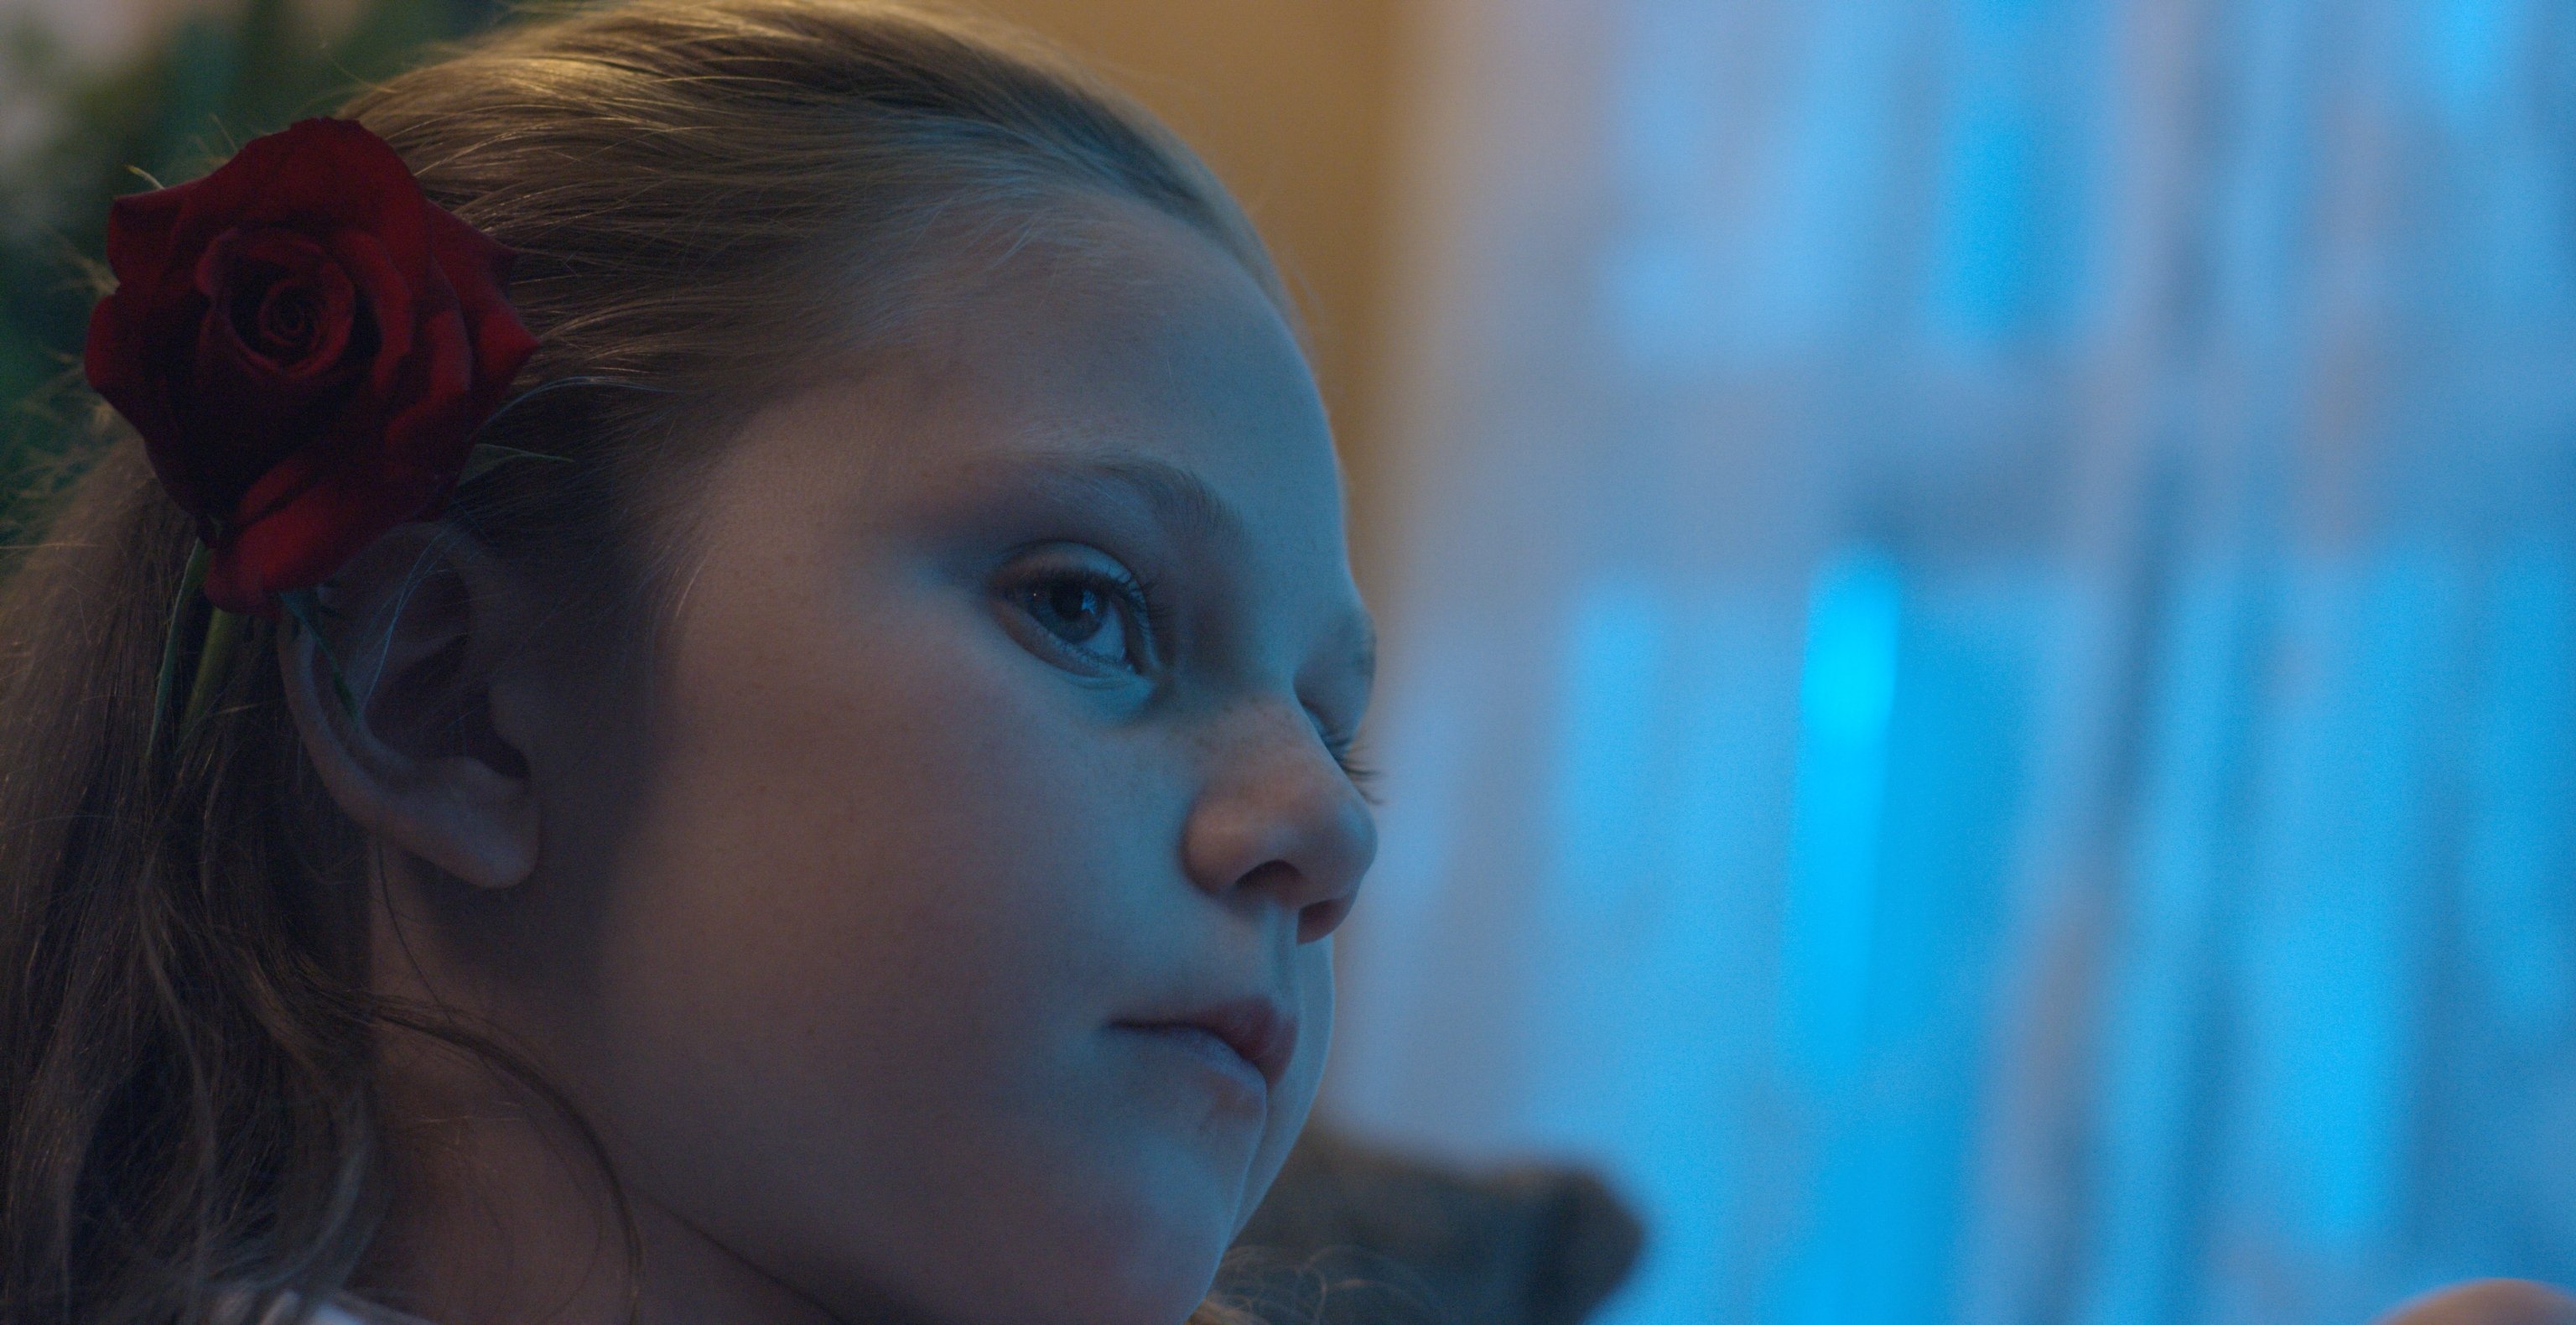 Lily Brooks O'Briant in the role of Emma. Still image from the trailer shoot.